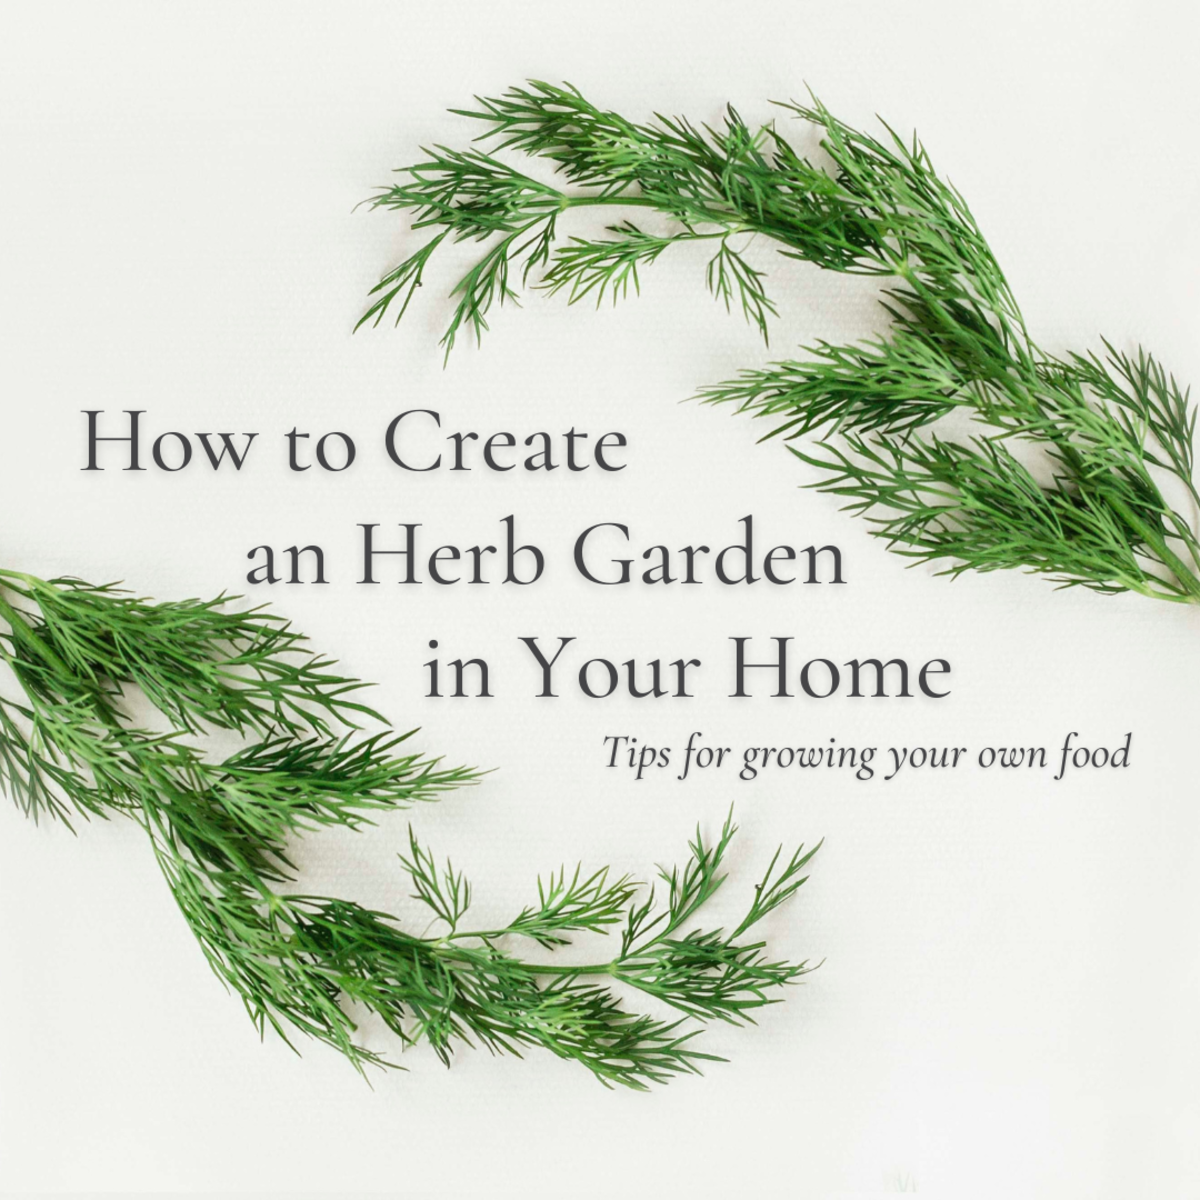 This article will break down all the basics for starting your own herb garden in your home.